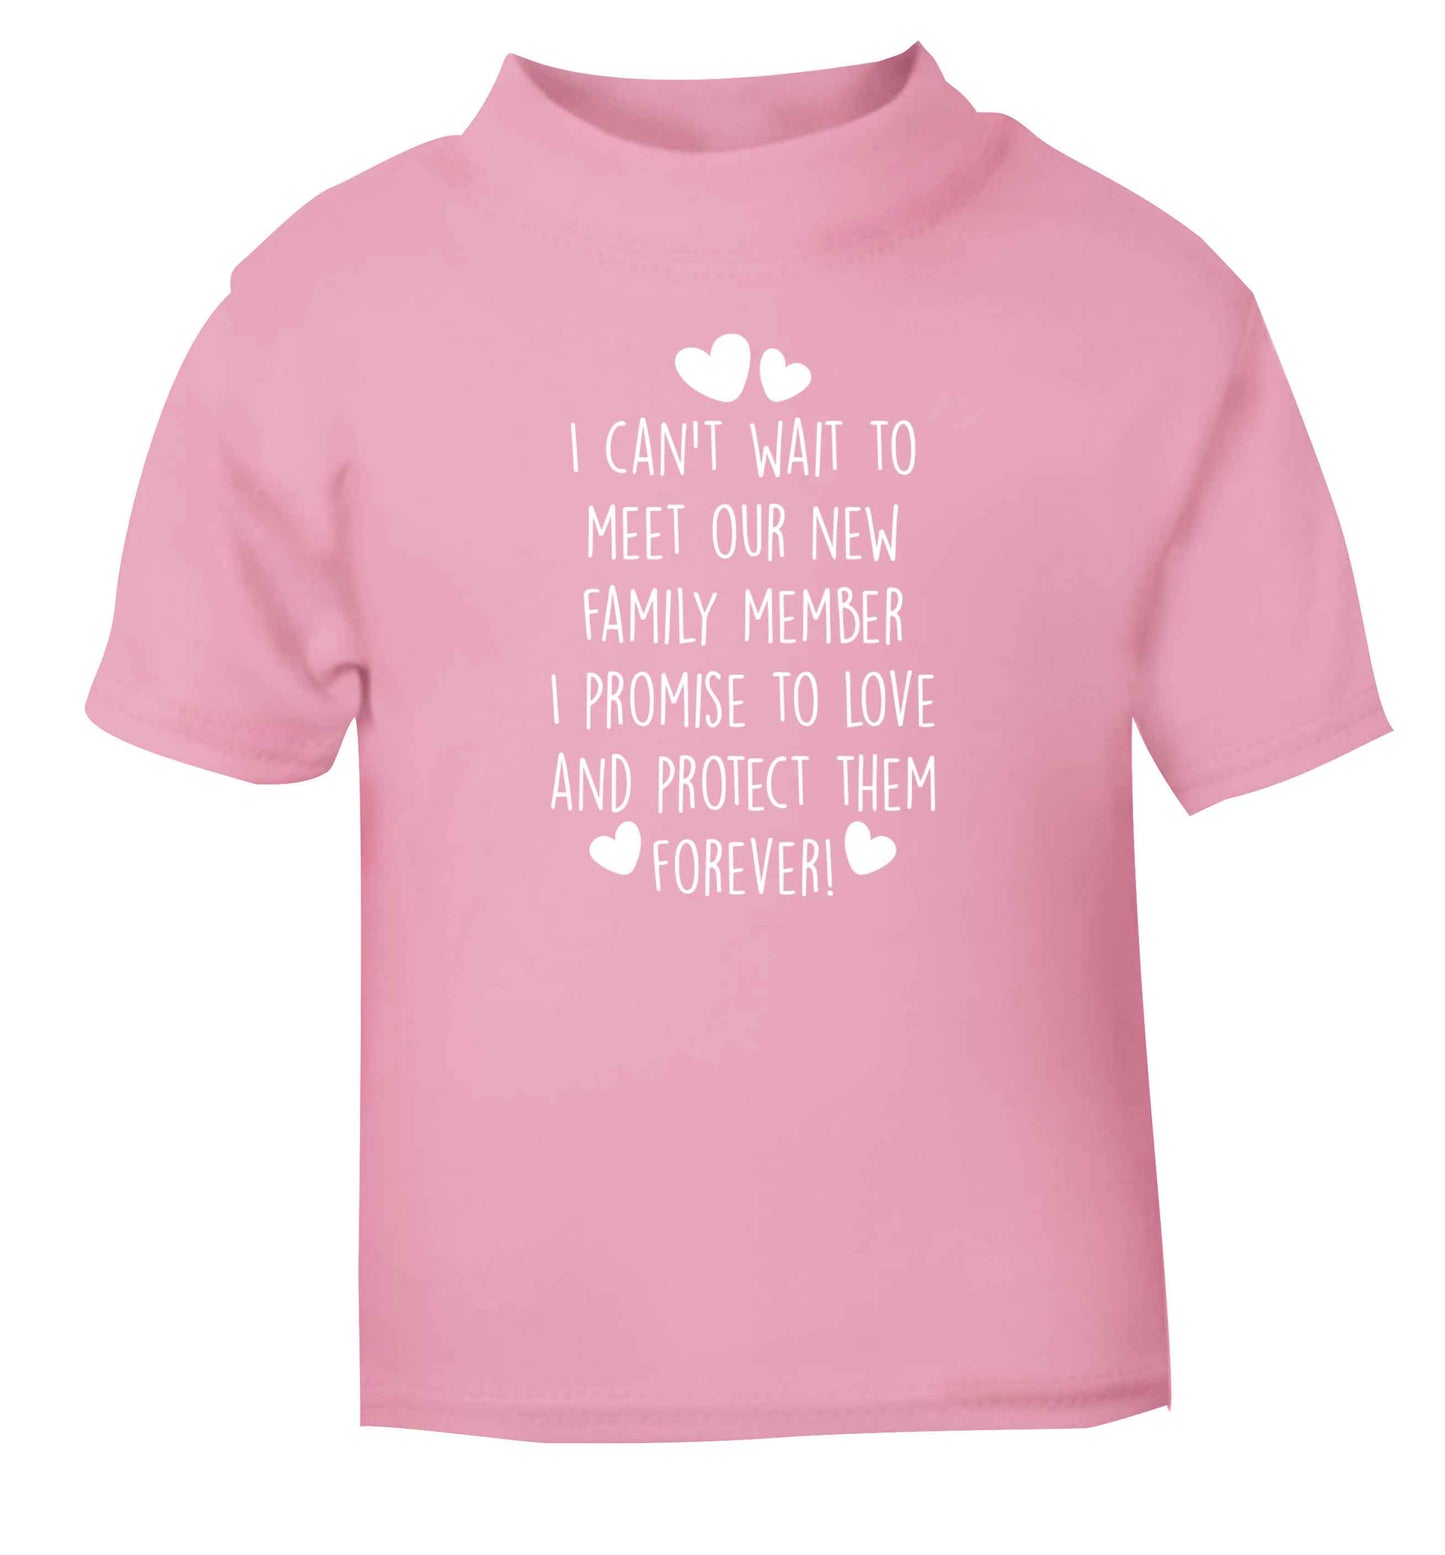 I can't wait to meet our new family member I promise to love and protect them foreverlight pink Baby Toddler Tshirt 2 Years